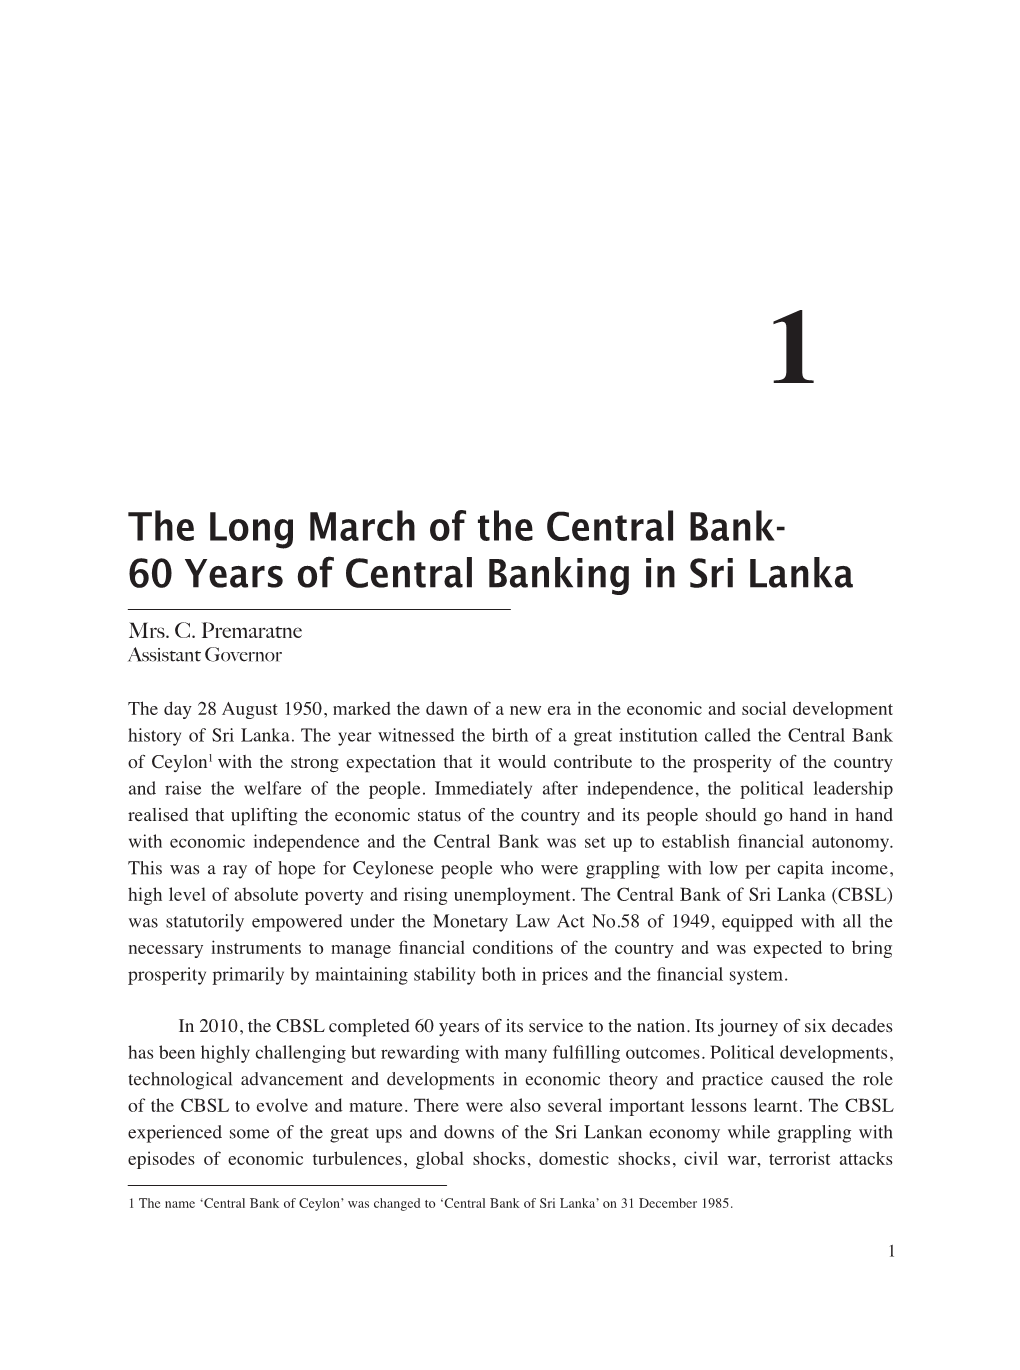 The Long March of the Central Bank- 60 Years of Central Banking in Sri Lanka